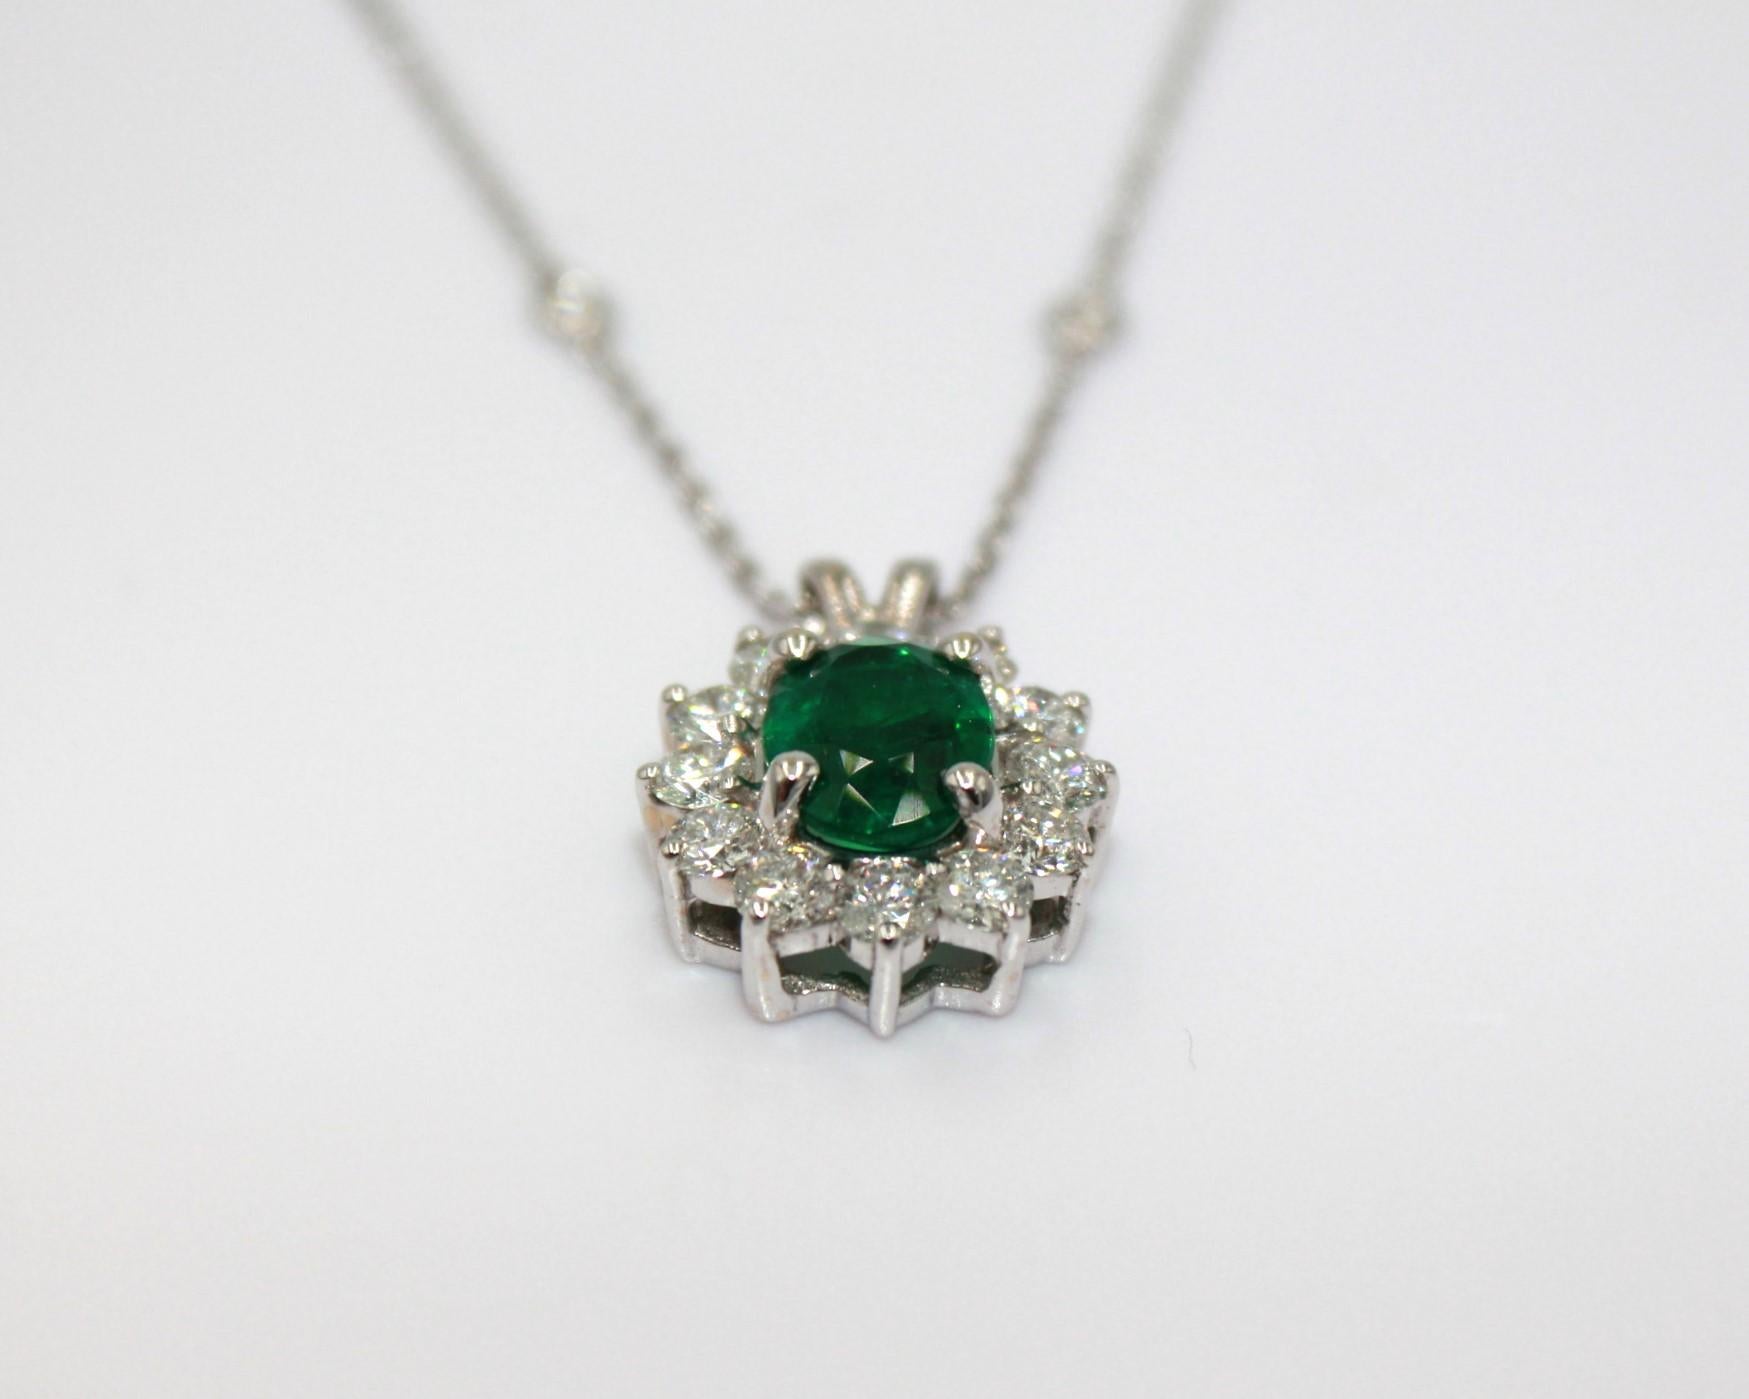 2.07 carats oval Zambian Emerald, framed with 12 round diamonds with pointer 12.0, totaling a diamond weight of 1.44 carats. 

This stunning Emerald Diamond Pendant will highlight your elegance and uniqueness. 

Item Details:
- Type: Pendant
-